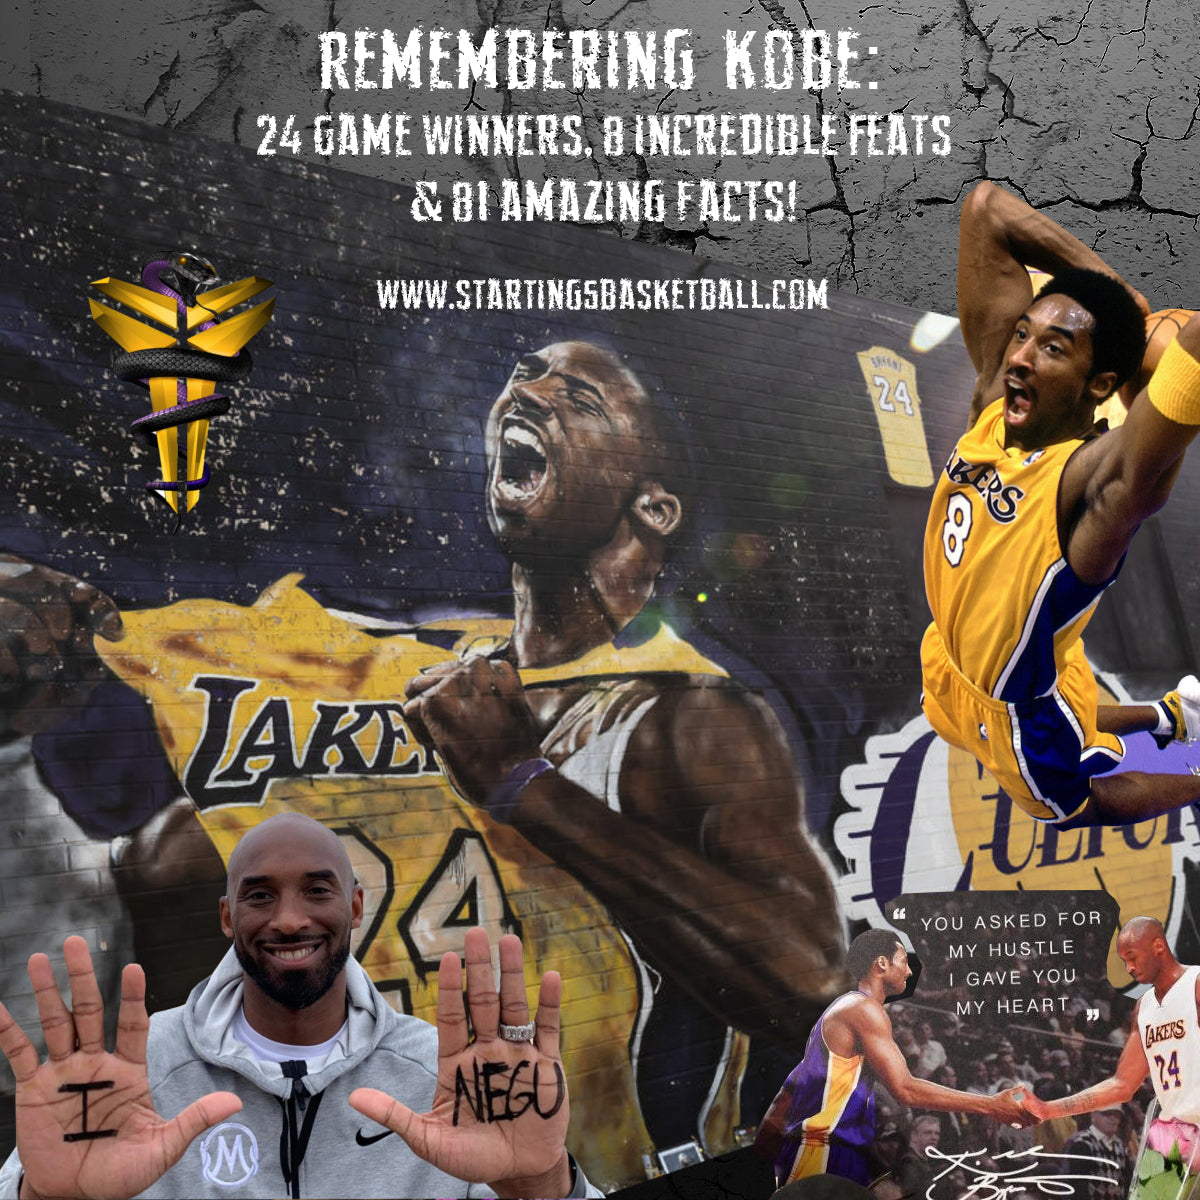 Lower Merion remembers Kobe Bryant, who put Pa. school on world map